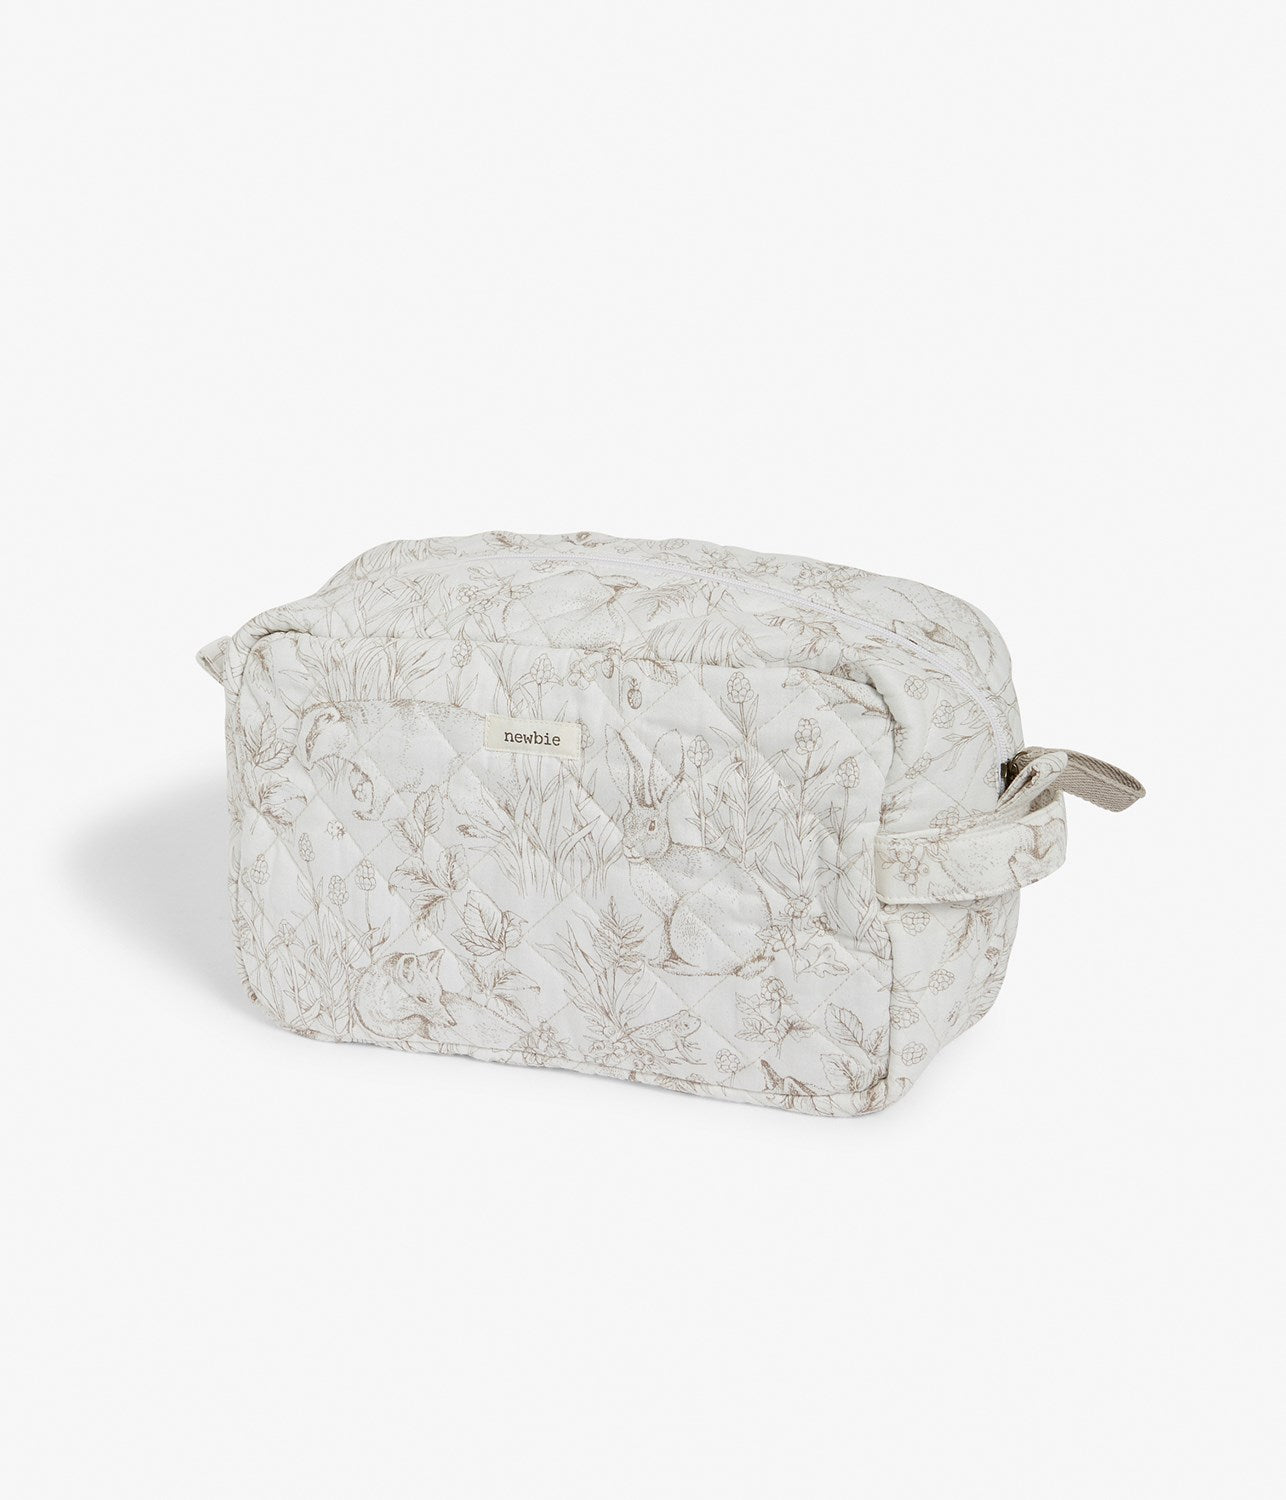 Quilted Medium Cosmetic Bag - White Case of 12 (59939 X 12)